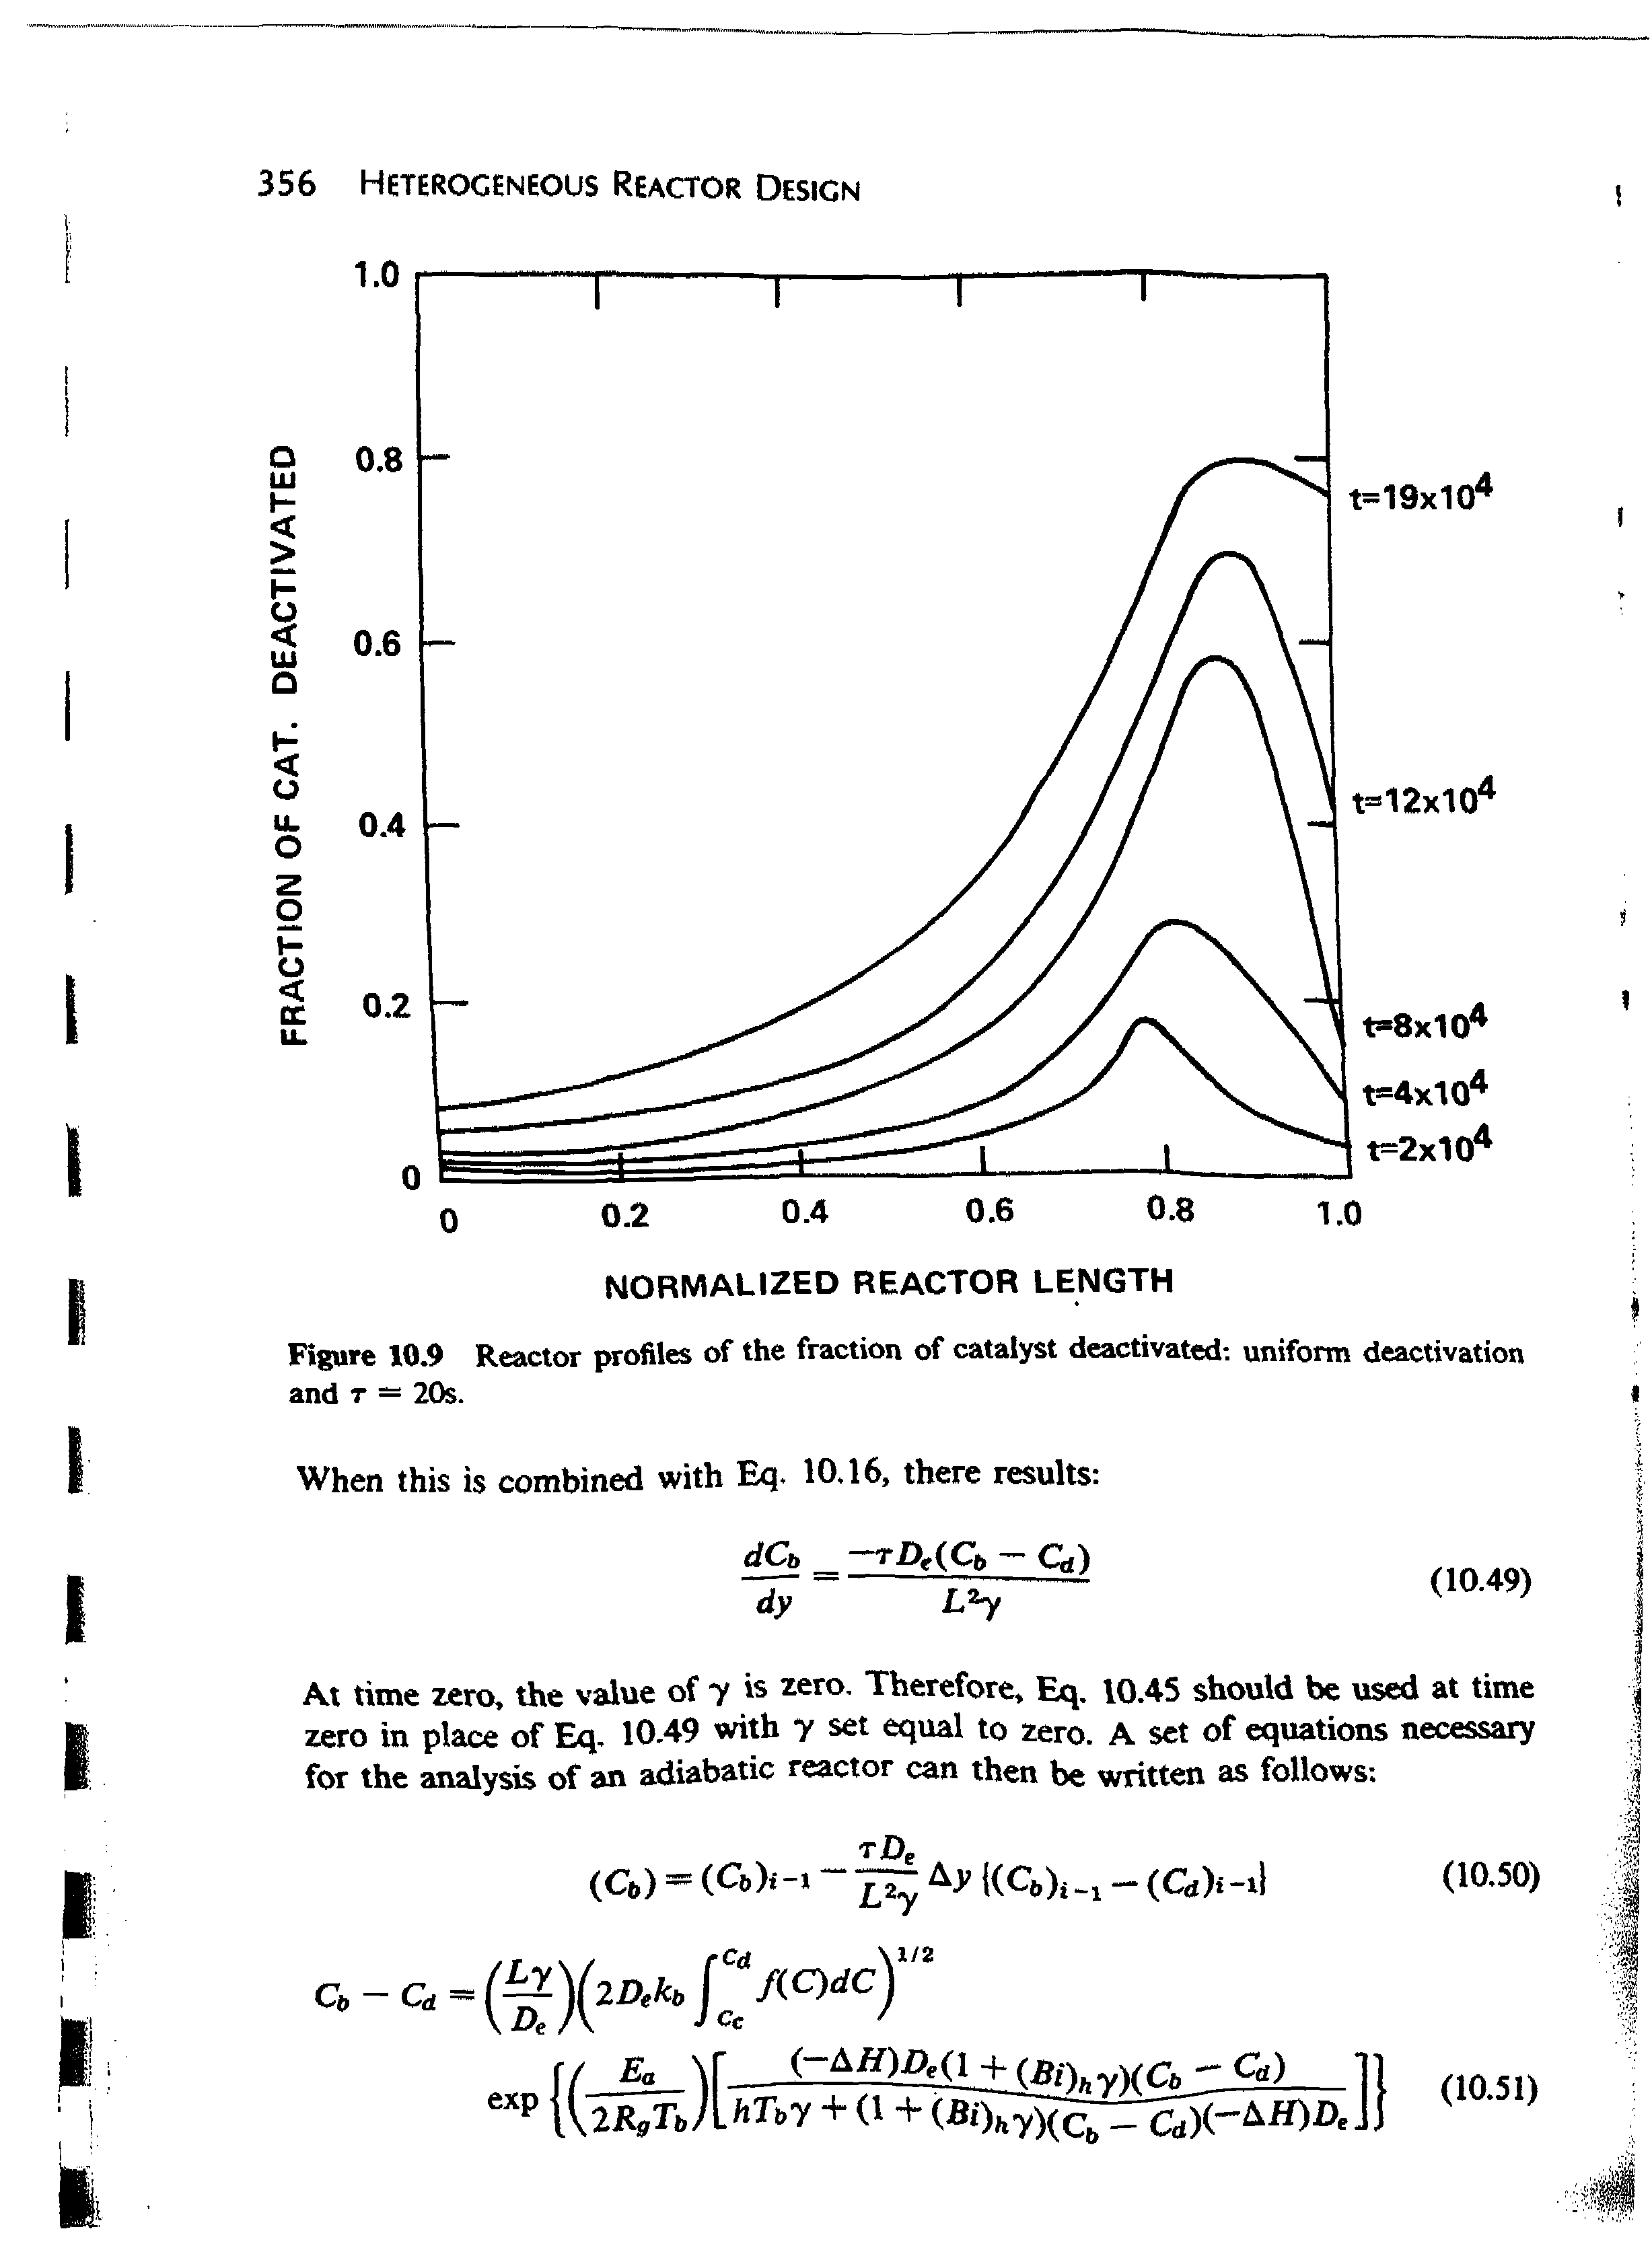 Figure 10.9 Reactor profiles of the fraction of catalyst deactivated uniform deactivation and T — 20s.